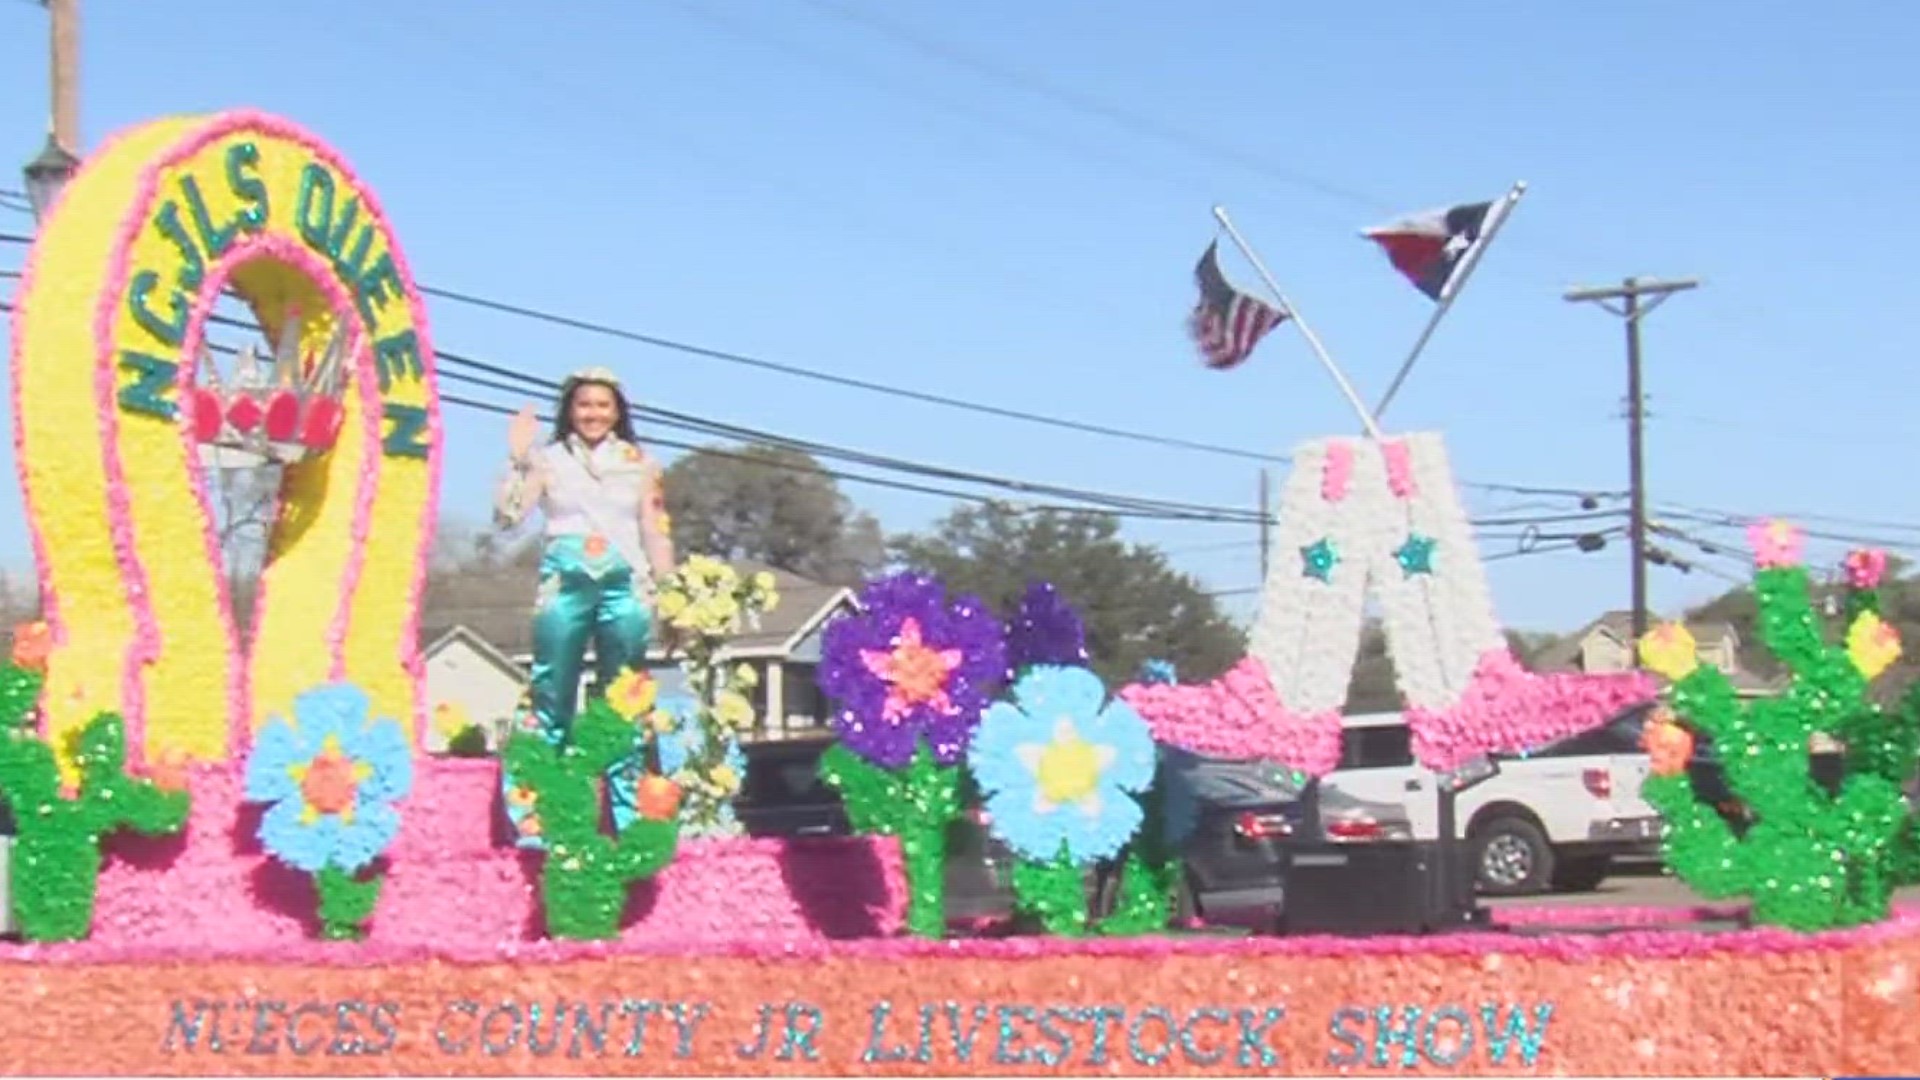 The 89th Annual Nueces County Jr. Livestock Show parade kicked off a busy schedule of family friendly events Saturday morning!